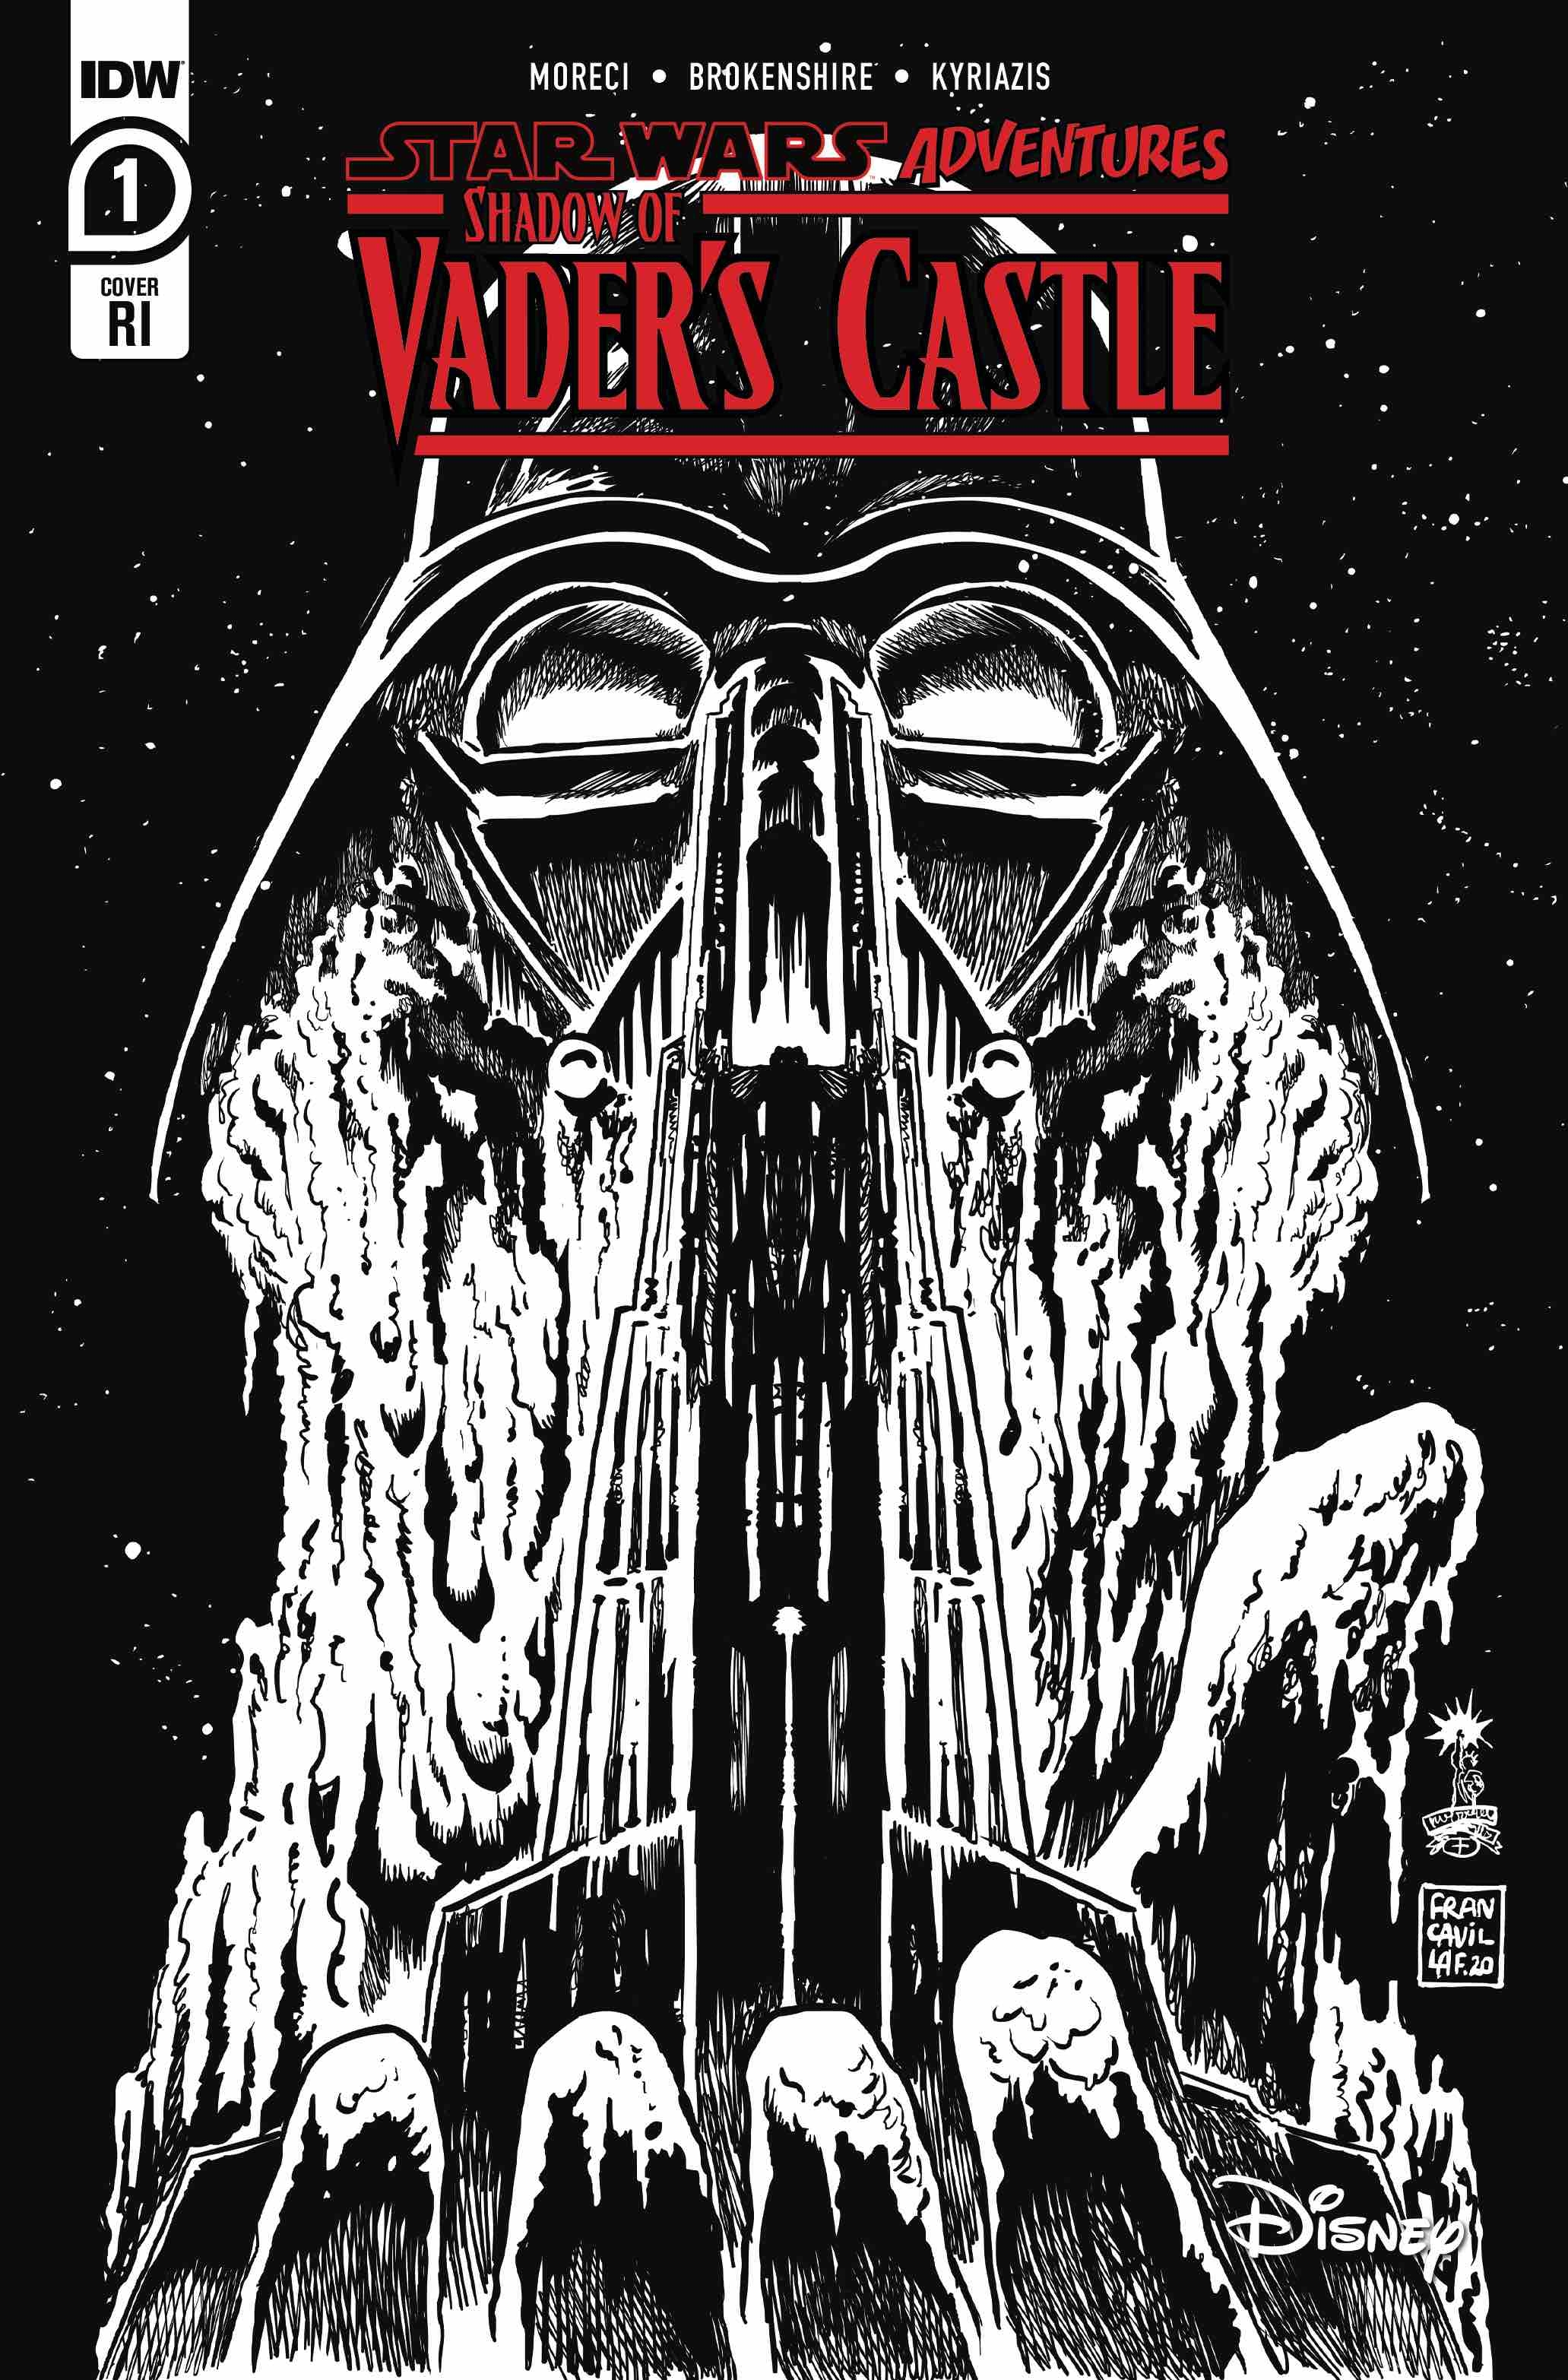 Star Wars Adventure Shadow of Vaders Castle #1 1 for 10 Incentive Cover Francavilla